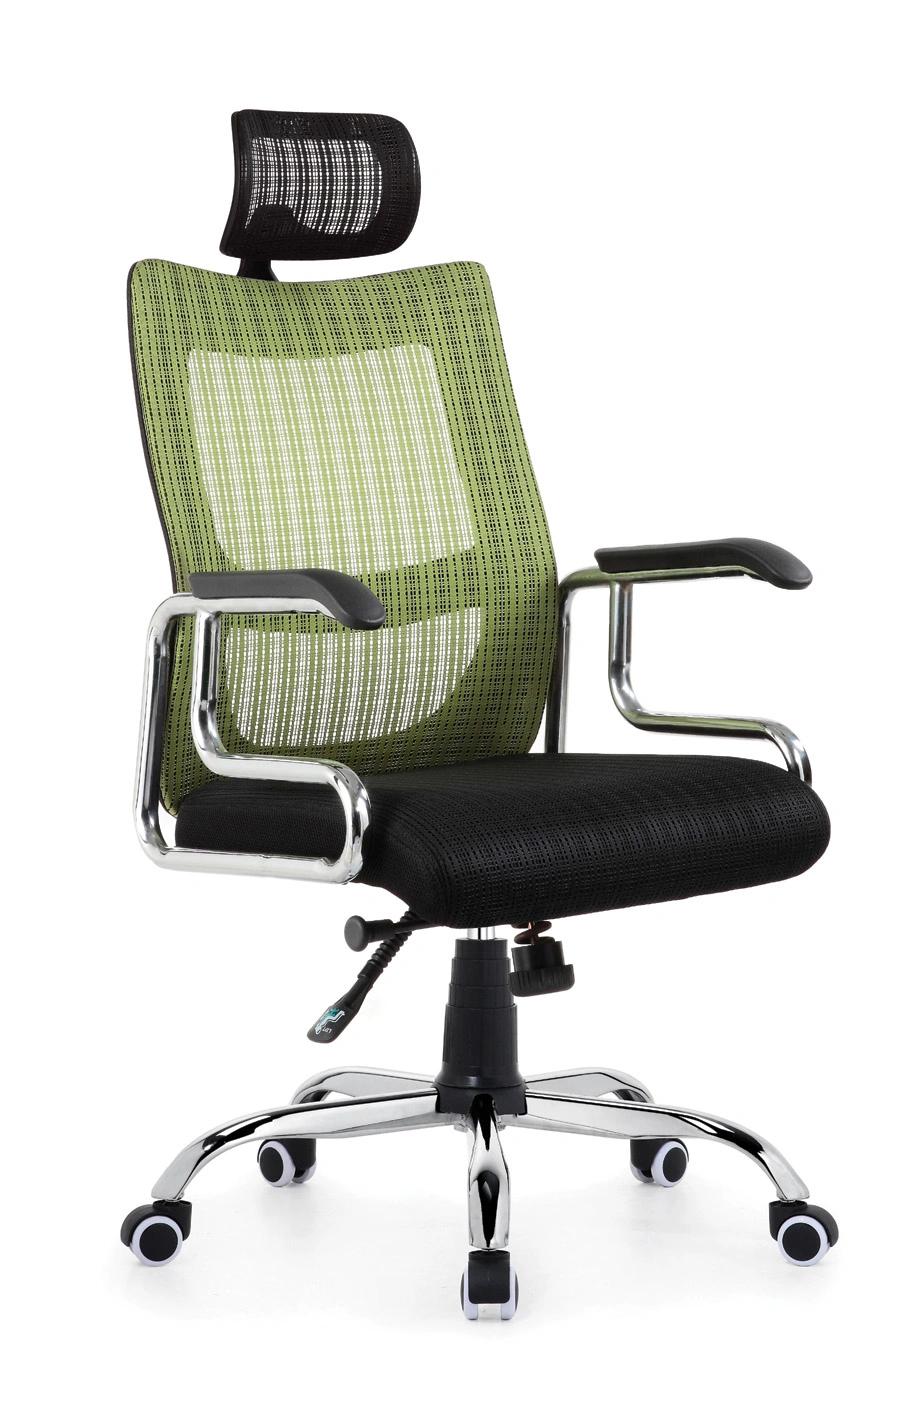 Classic Style Adjustable High Back Fabric Mesh Office Chair Swivel Mesh Chair-5280A